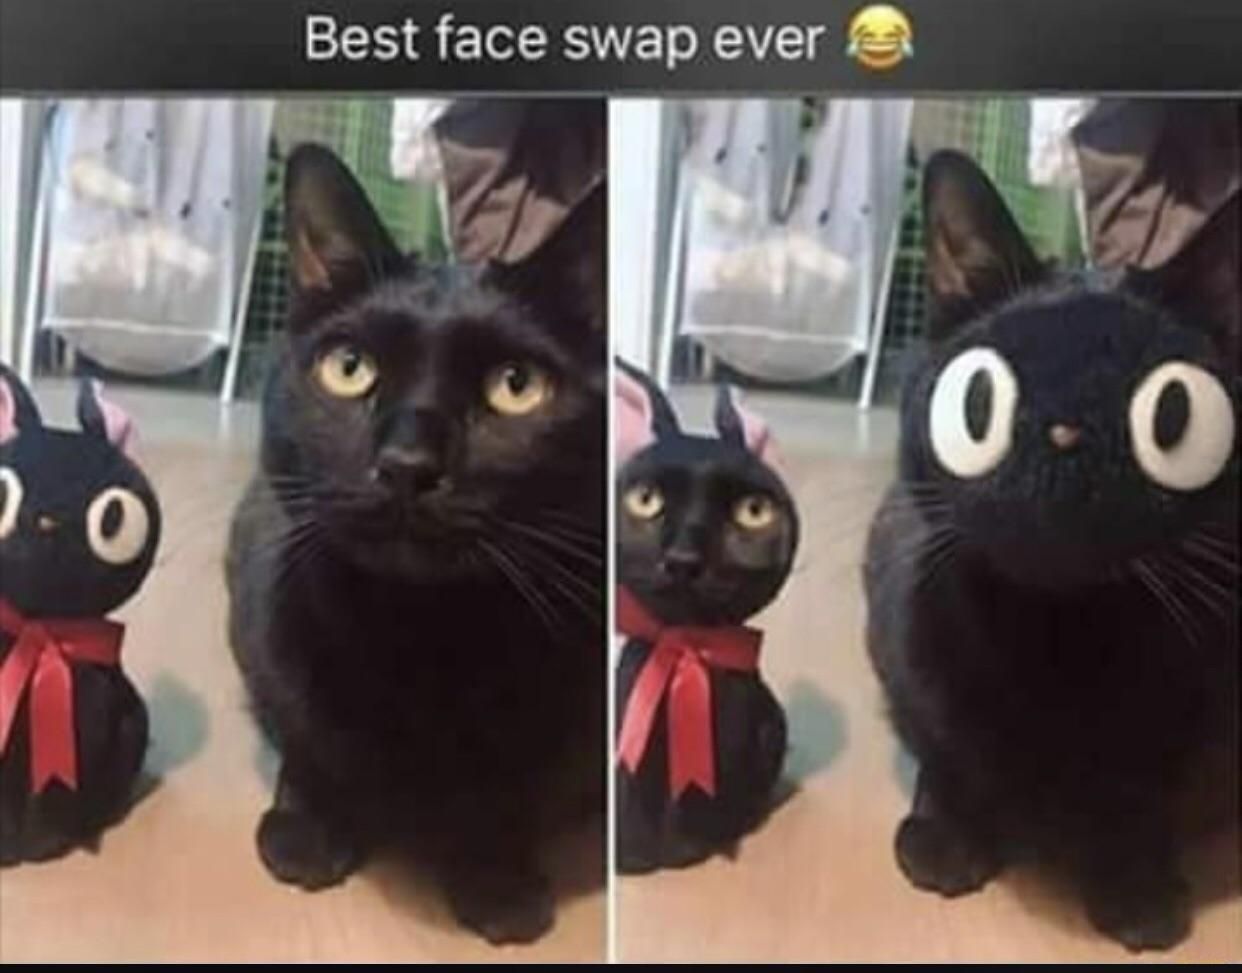 Is this the best face swap or what?